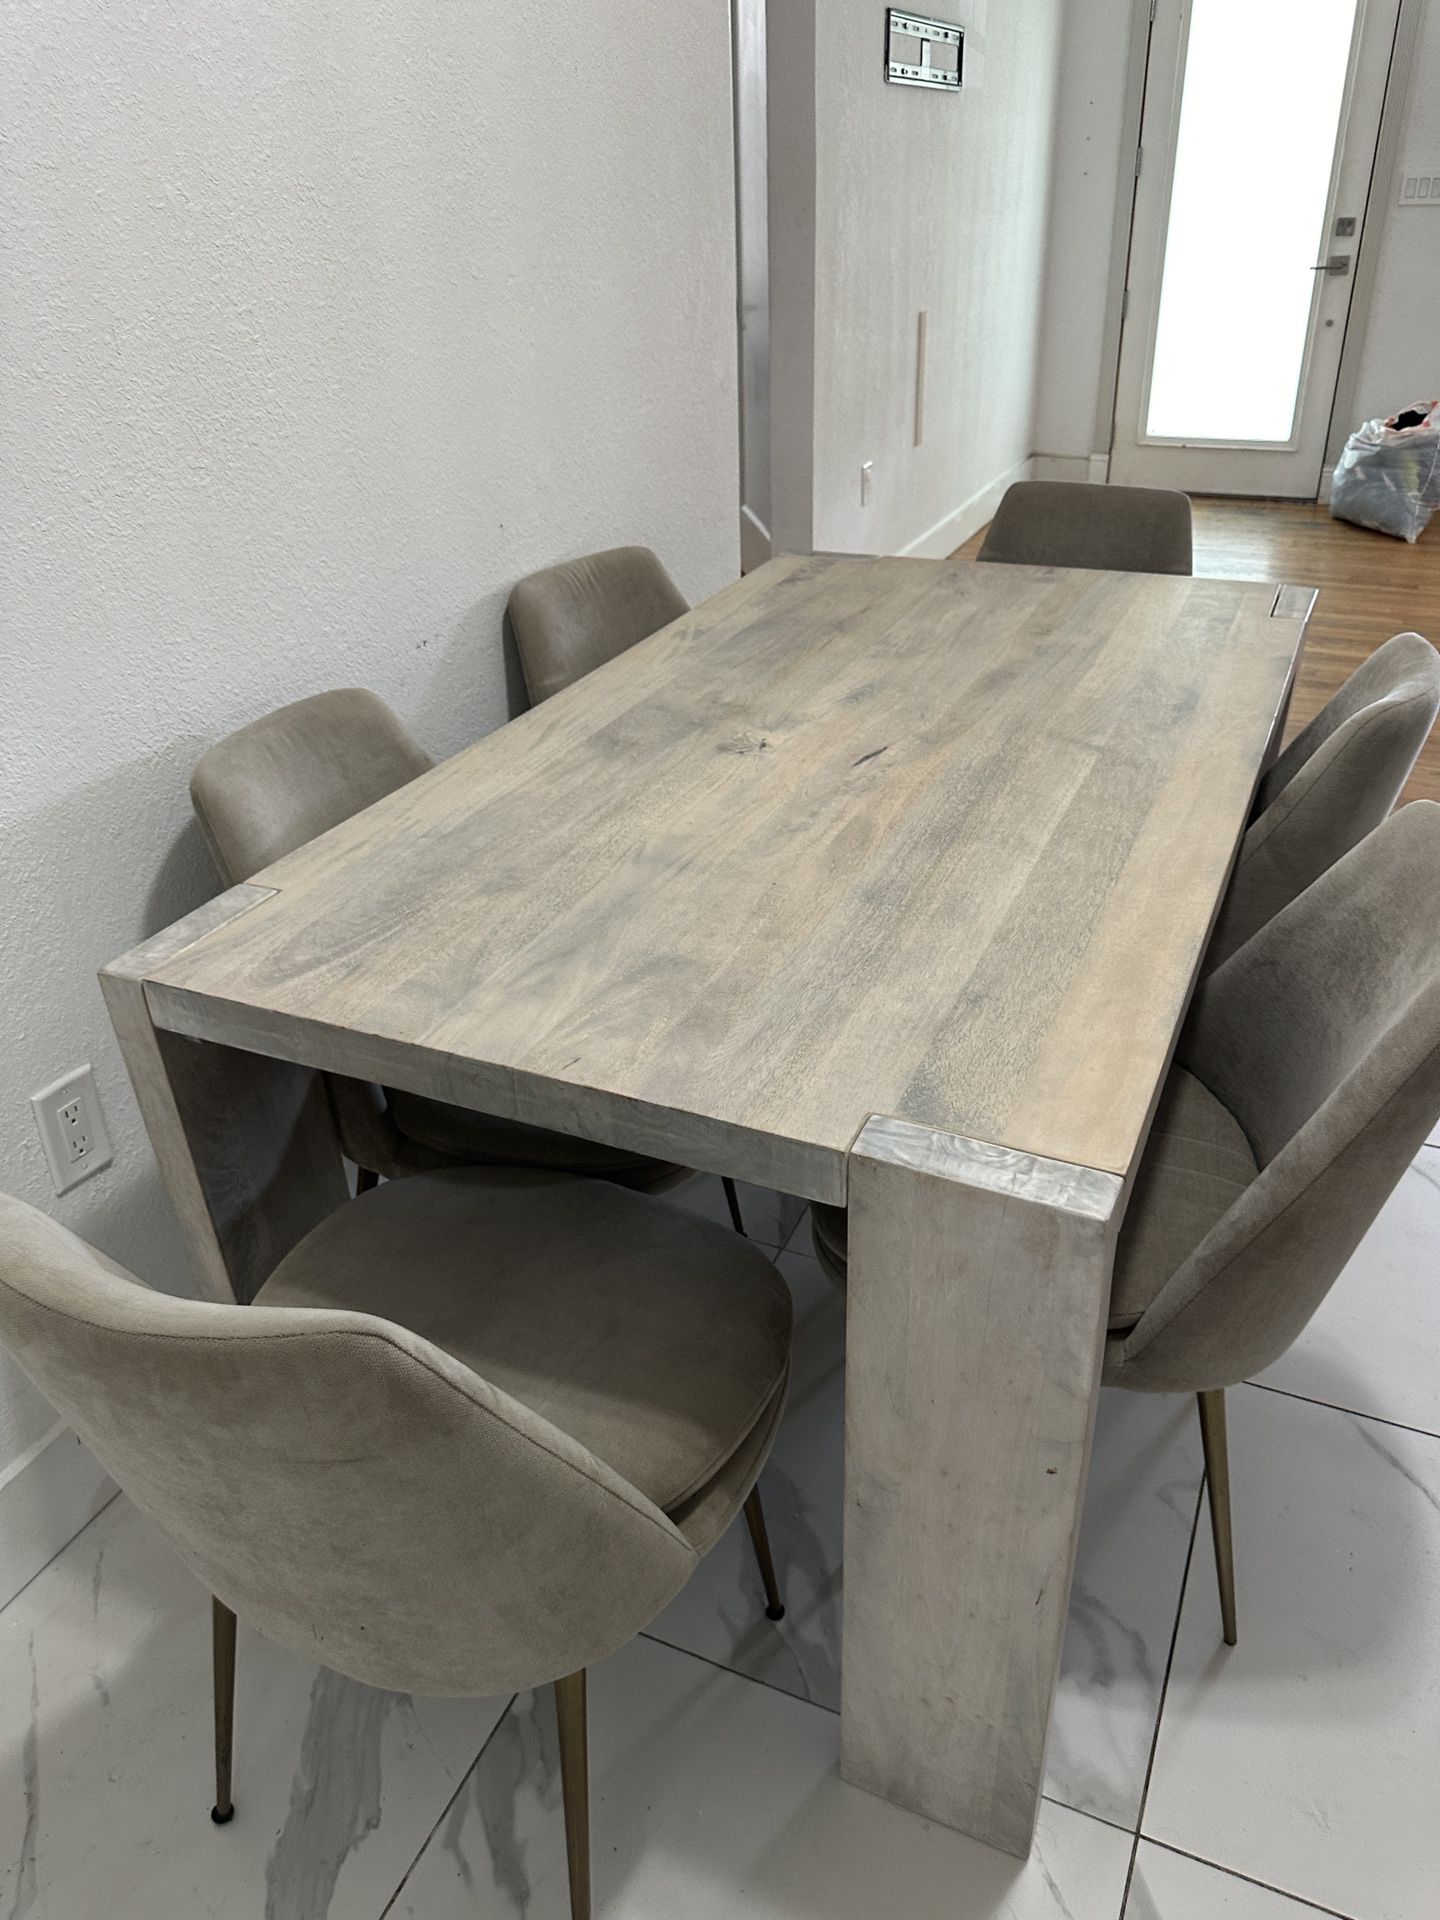 West Elm Chairs CB2 Table 